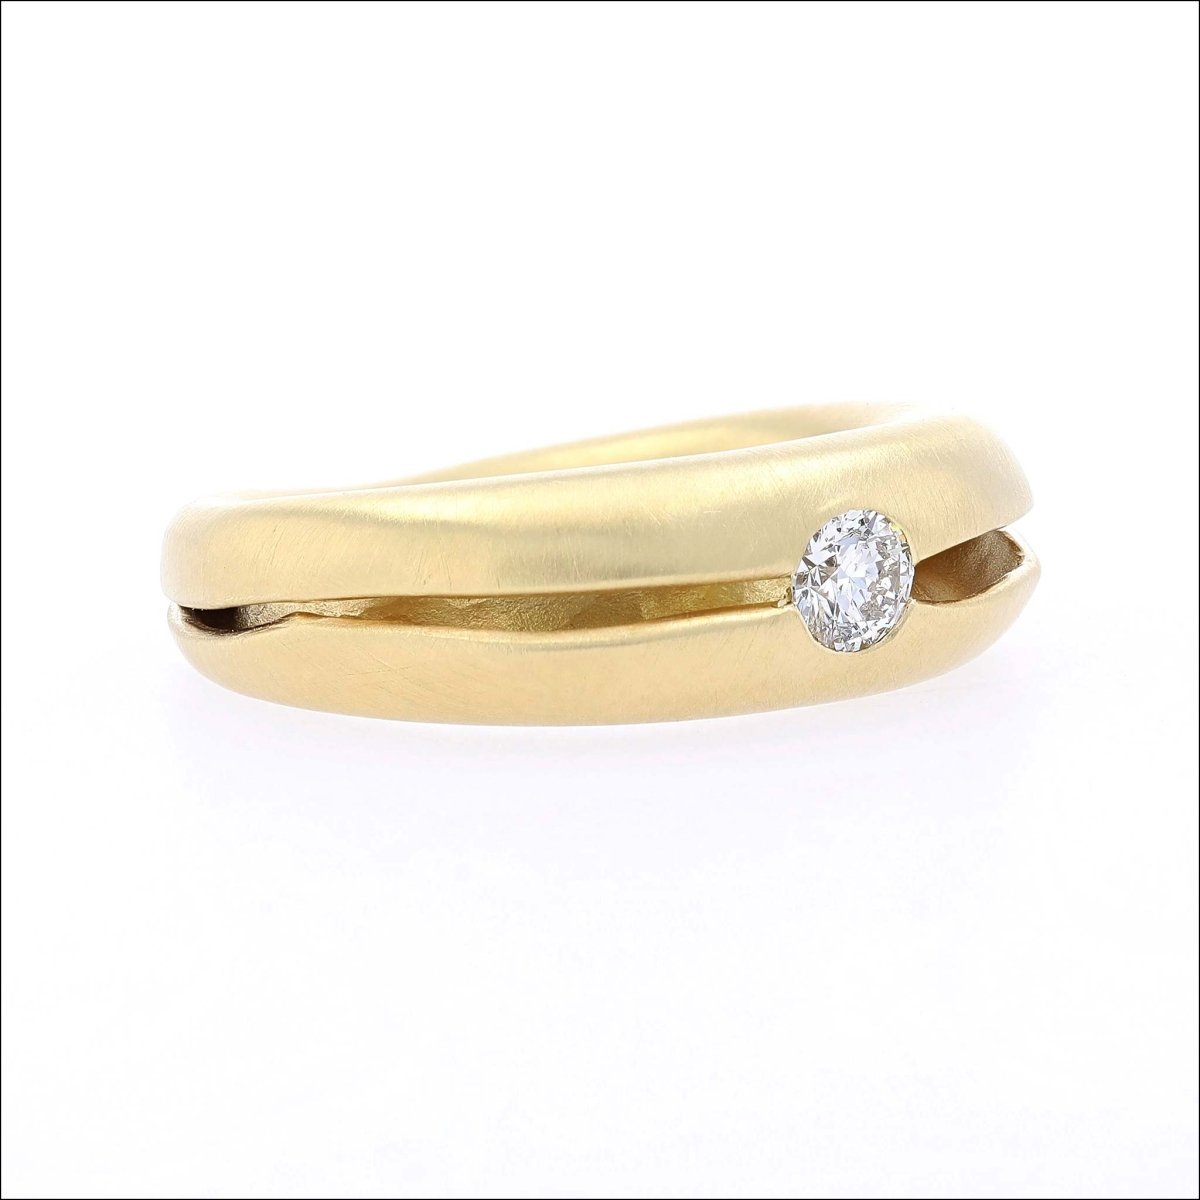 Diamond in a Fold Ring 18KY - JewelsmithBands